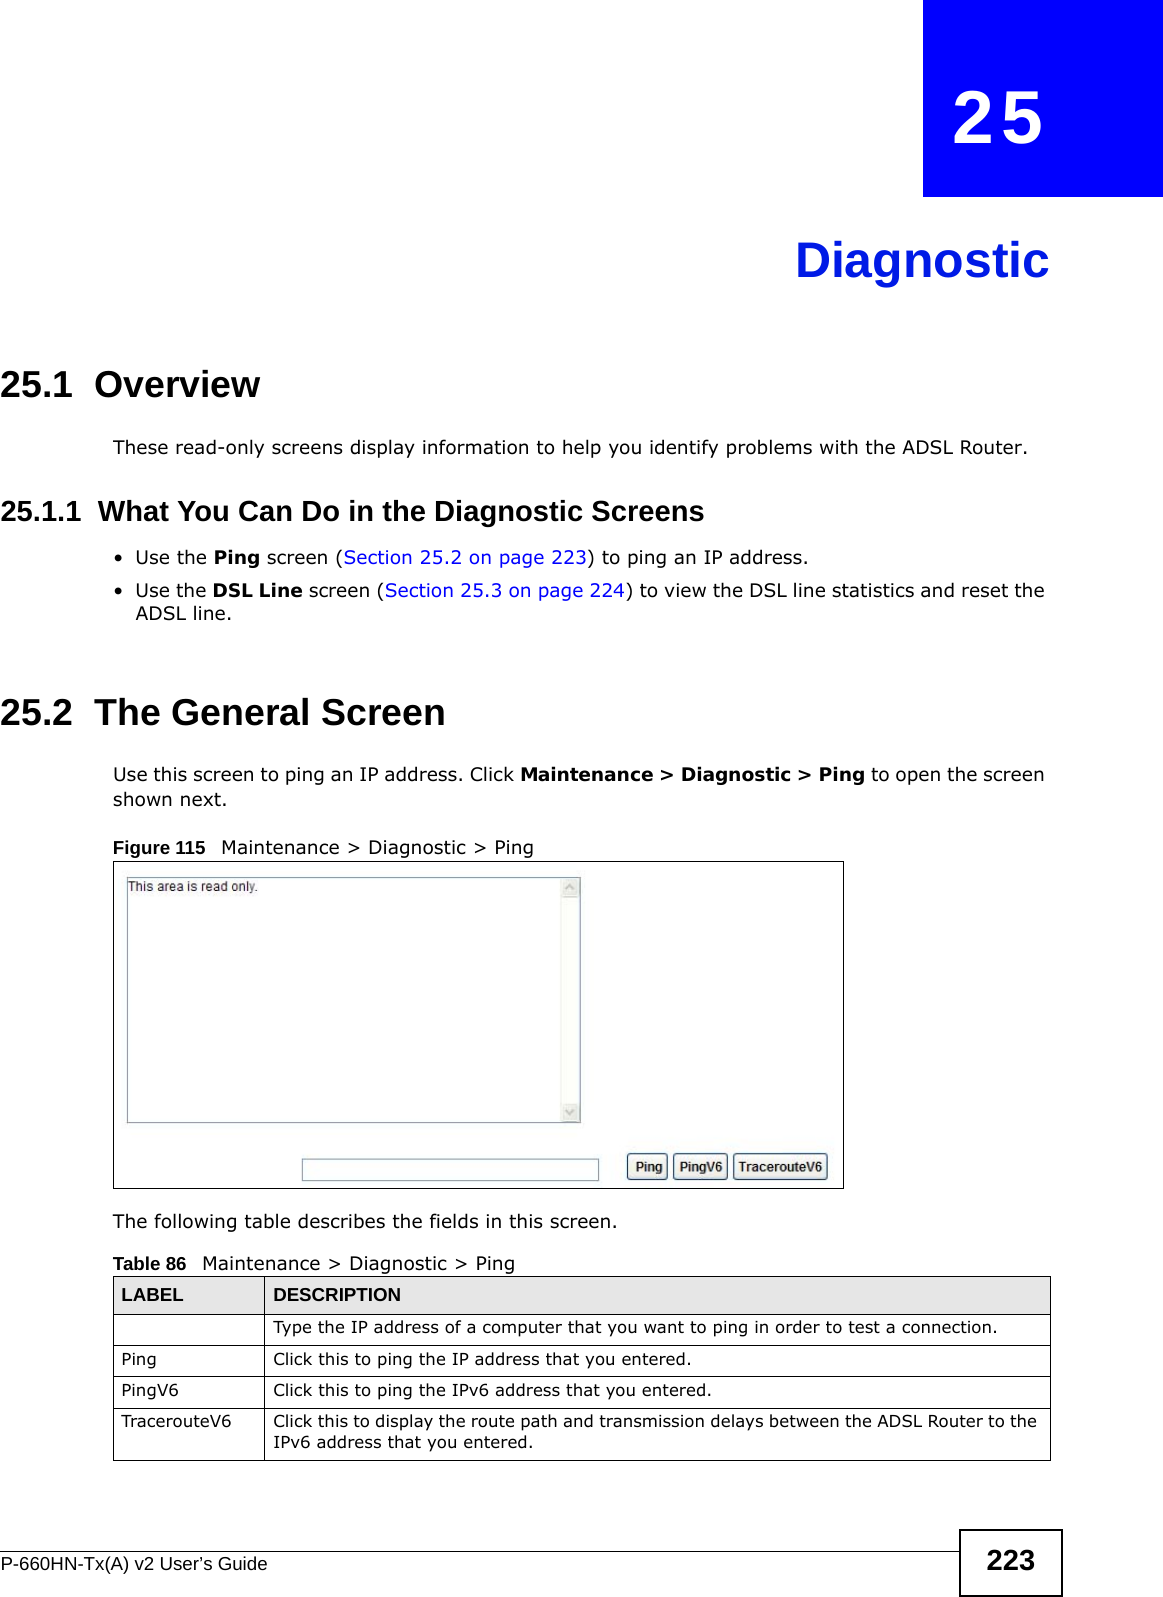 P-660HN-Tx(A) v2 User’s Guide 223CHAPTER   25Diagnostic25.1  OverviewThese read-only screens display information to help you identify problems with the ADSL Router.25.1.1  What You Can Do in the Diagnostic Screens•Use the Ping screen (Section 25.2 on page 223) to ping an IP address.•Use the DSL Line screen (Section 25.3 on page 224) to view the DSL line statistics and reset the ADSL line.25.2  The General Screen Use this screen to ping an IP address. Click Maintenance &gt; Diagnostic &gt; Ping to open the screen shown next.Figure 115   Maintenance &gt; Diagnostic &gt; PingThe following table describes the fields in this screen. Table 86   Maintenance &gt; Diagnostic &gt; PingLABEL DESCRIPTIONType the IP address of a computer that you want to ping in order to test a connection.Ping Click this to ping the IP address that you entered.PingV6 Click this to ping the IPv6 address that you entered.TracerouteV6 Click this to display the route path and transmission delays between the ADSL Router to the IPv6 address that you entered.